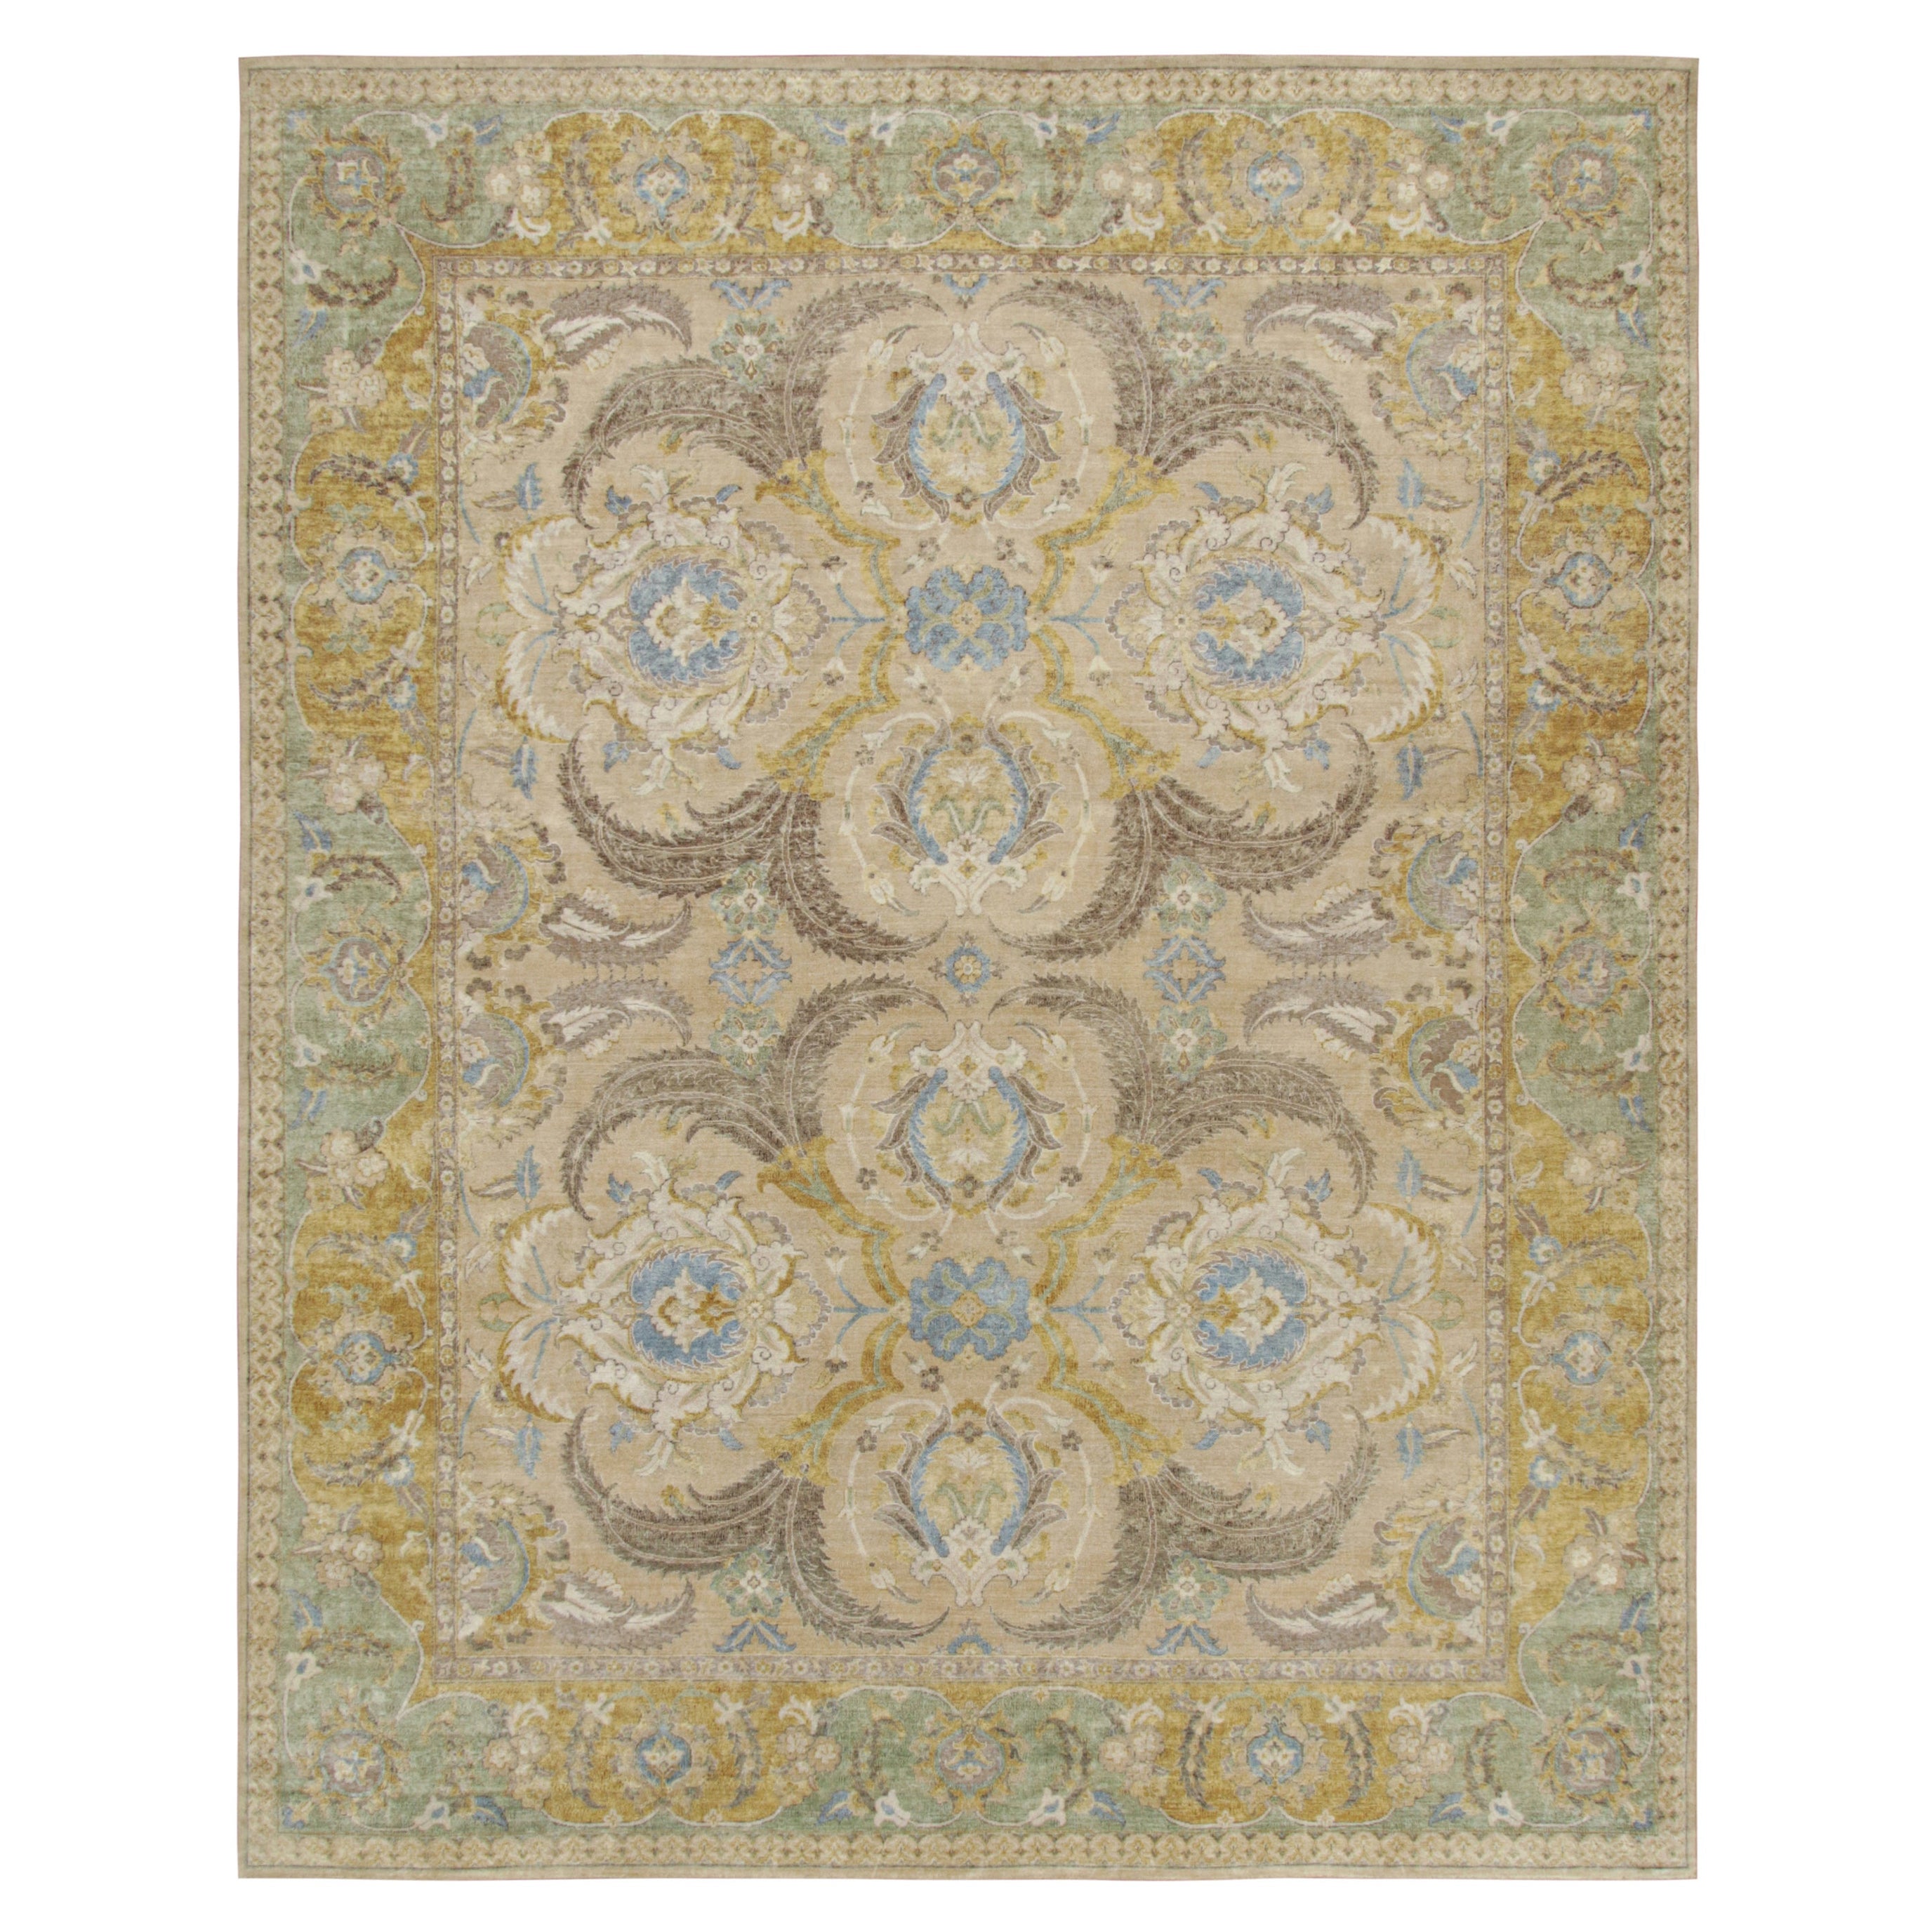 Rug & Kilim’s Polonaise Style rug in Beige with Gold and Blue Floral Patterns For Sale